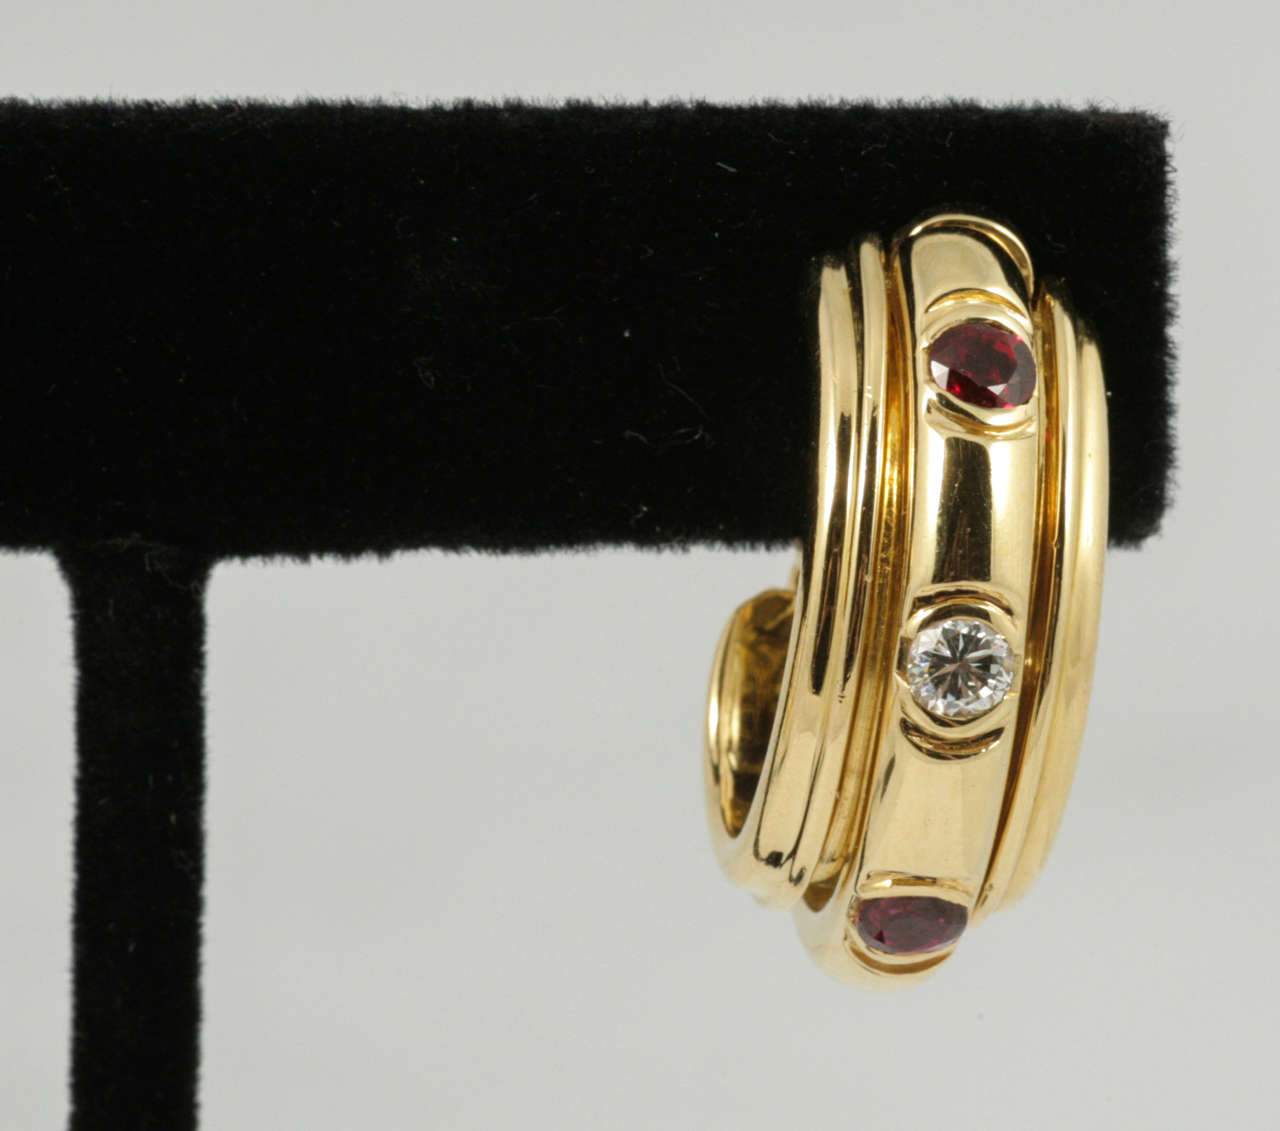 Elegant pair of 18ct yellow gold, ruby and diamond earrings from the 